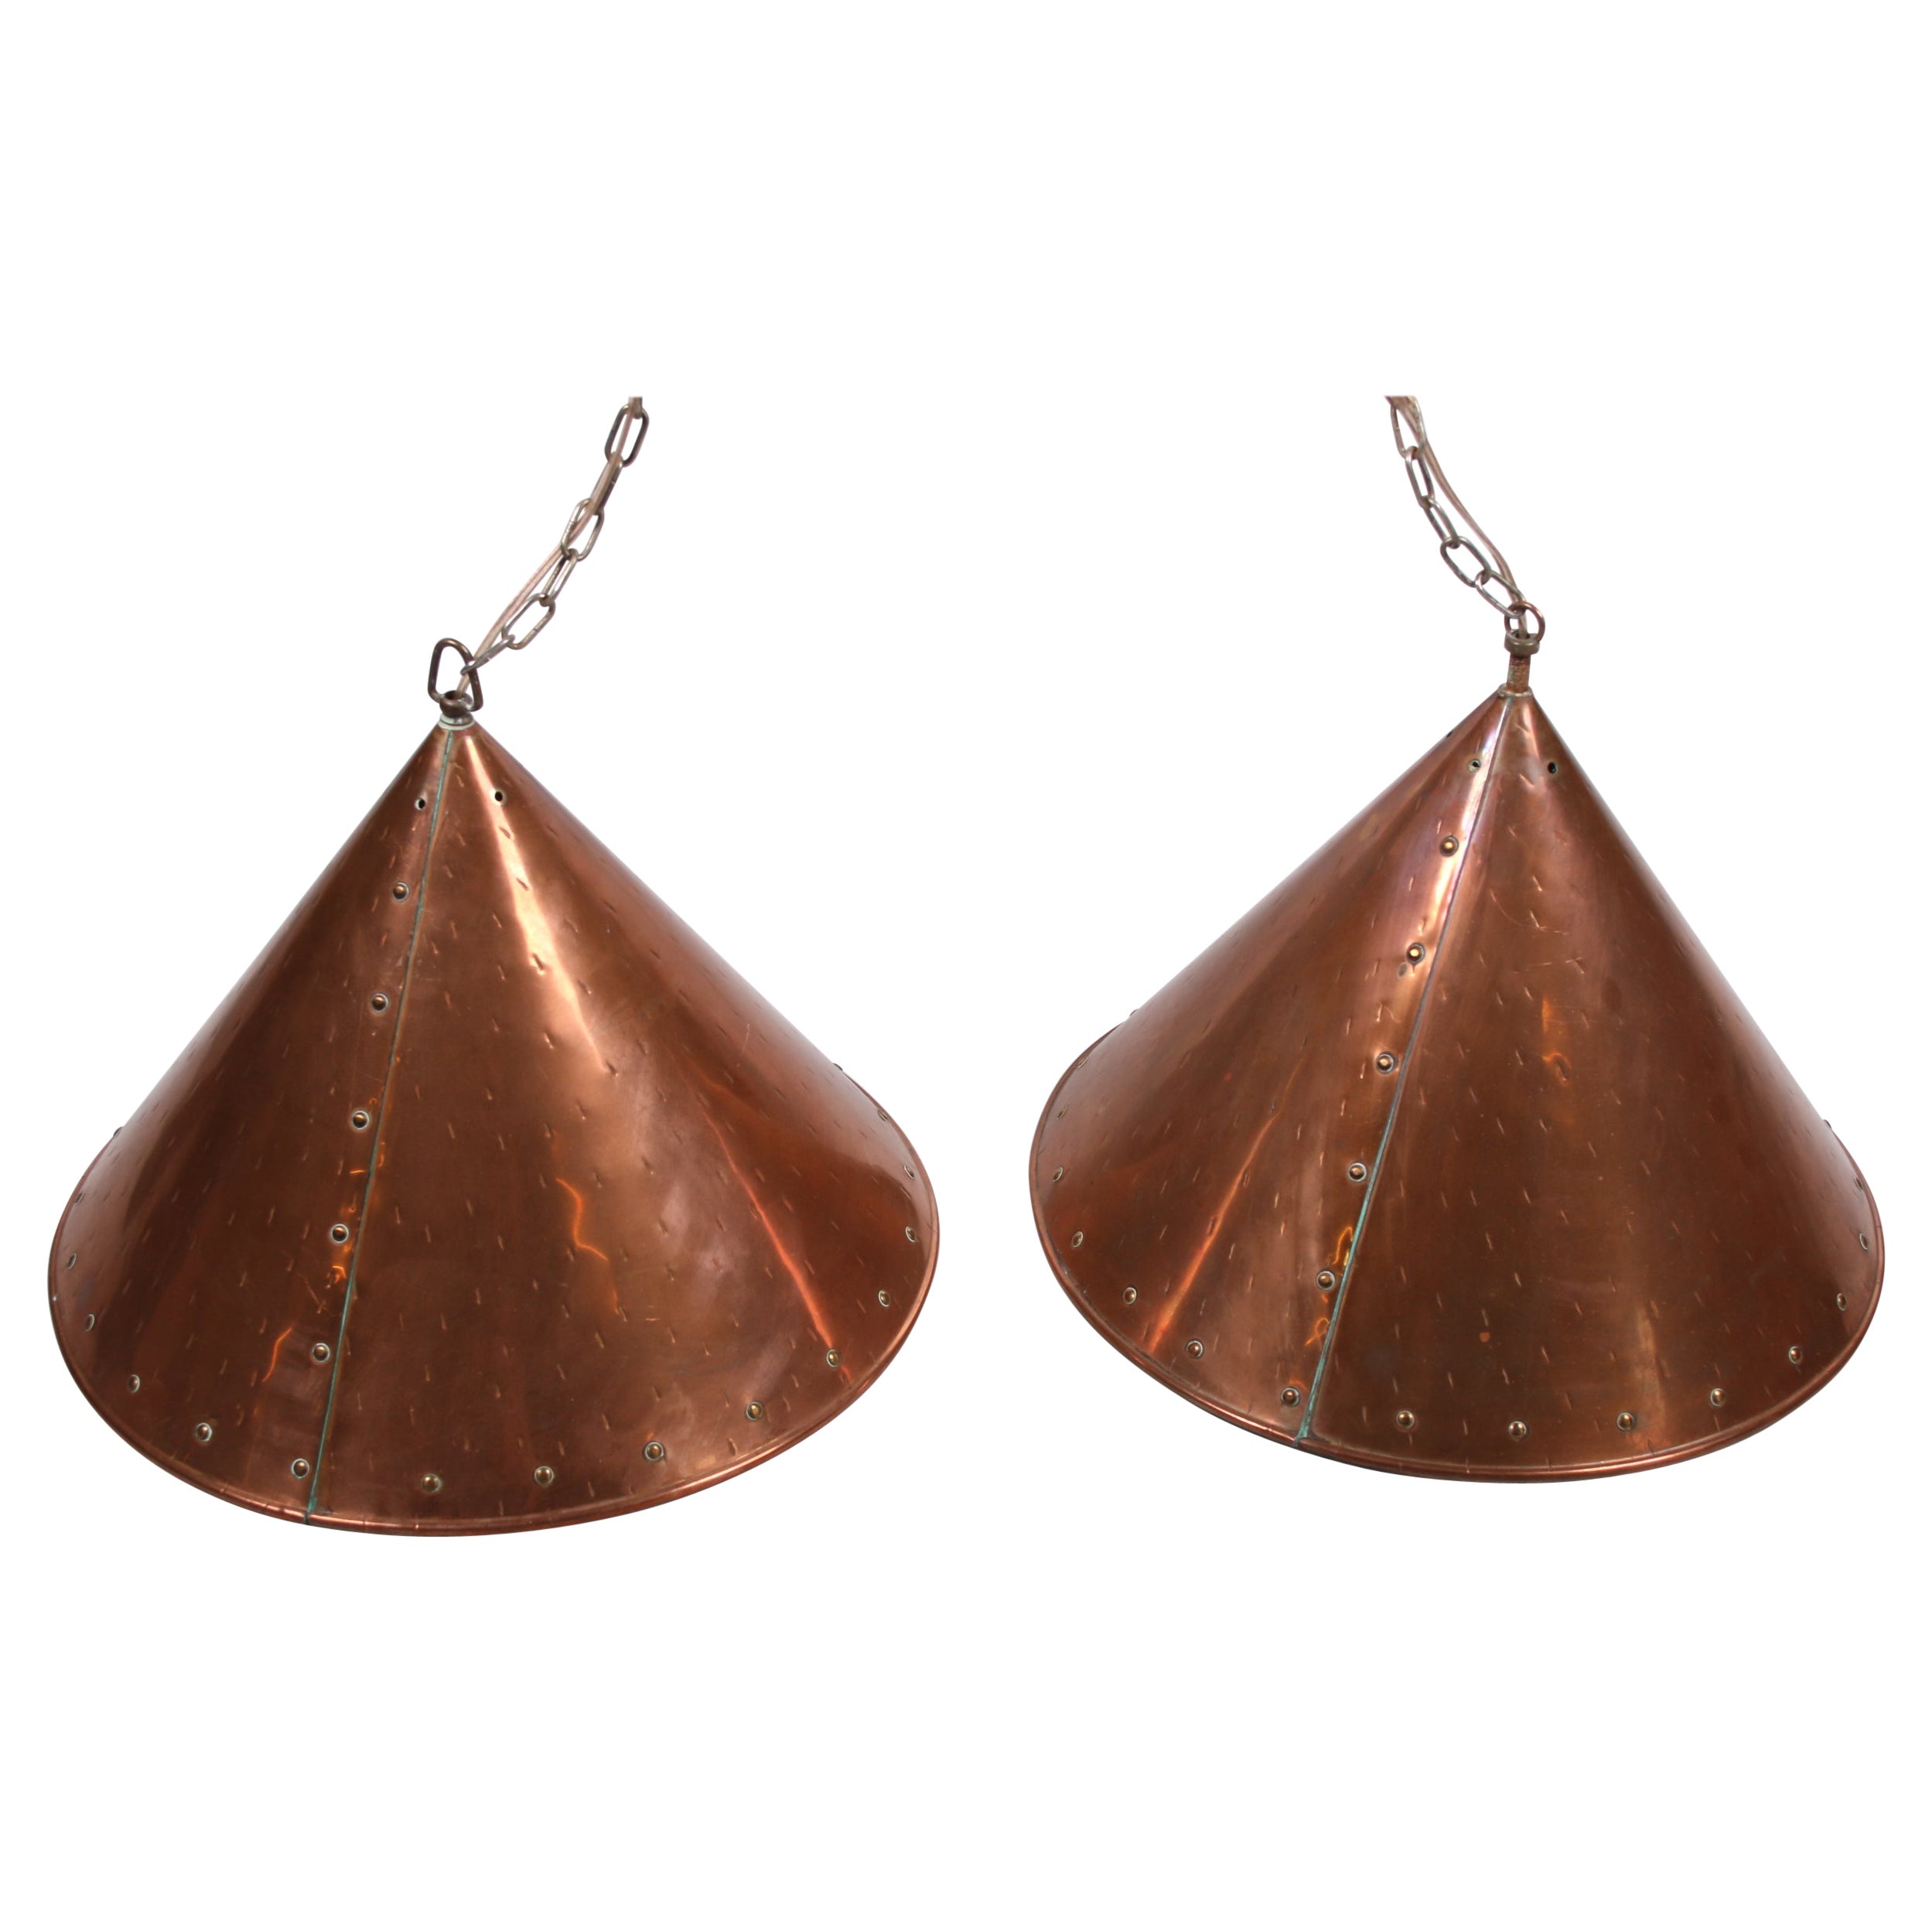 Danish Hand Hammered Copper Pendant Lamps by ES Horn Aalestrup, 1950s